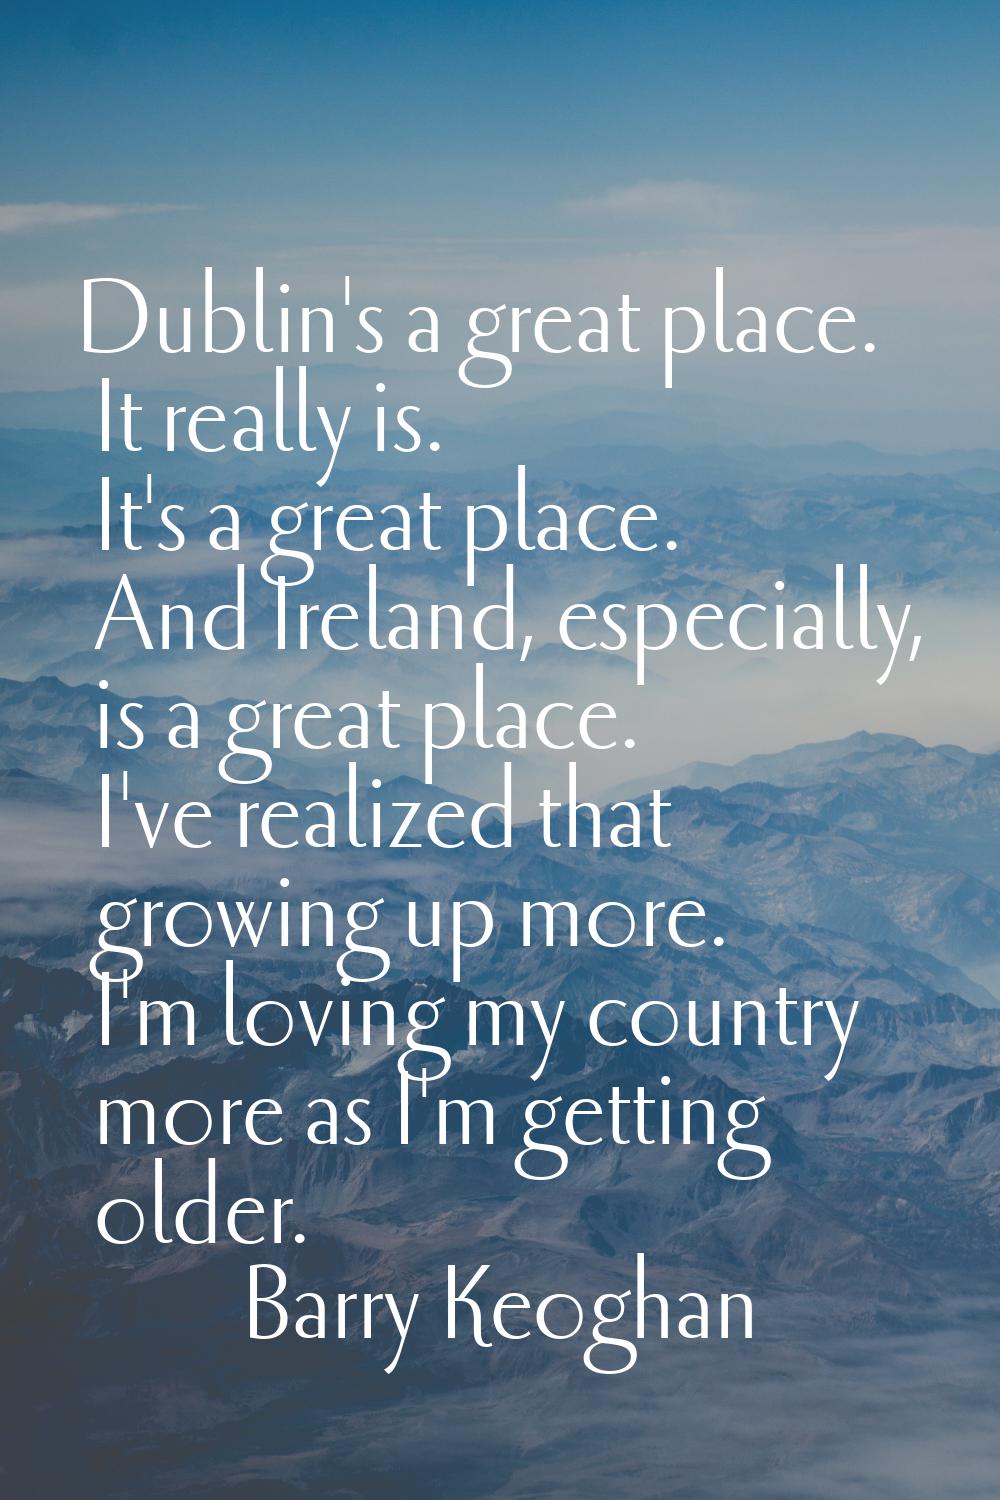 Dublin's a great place. It really is. It's a great place. And Ireland, especially, is a great place